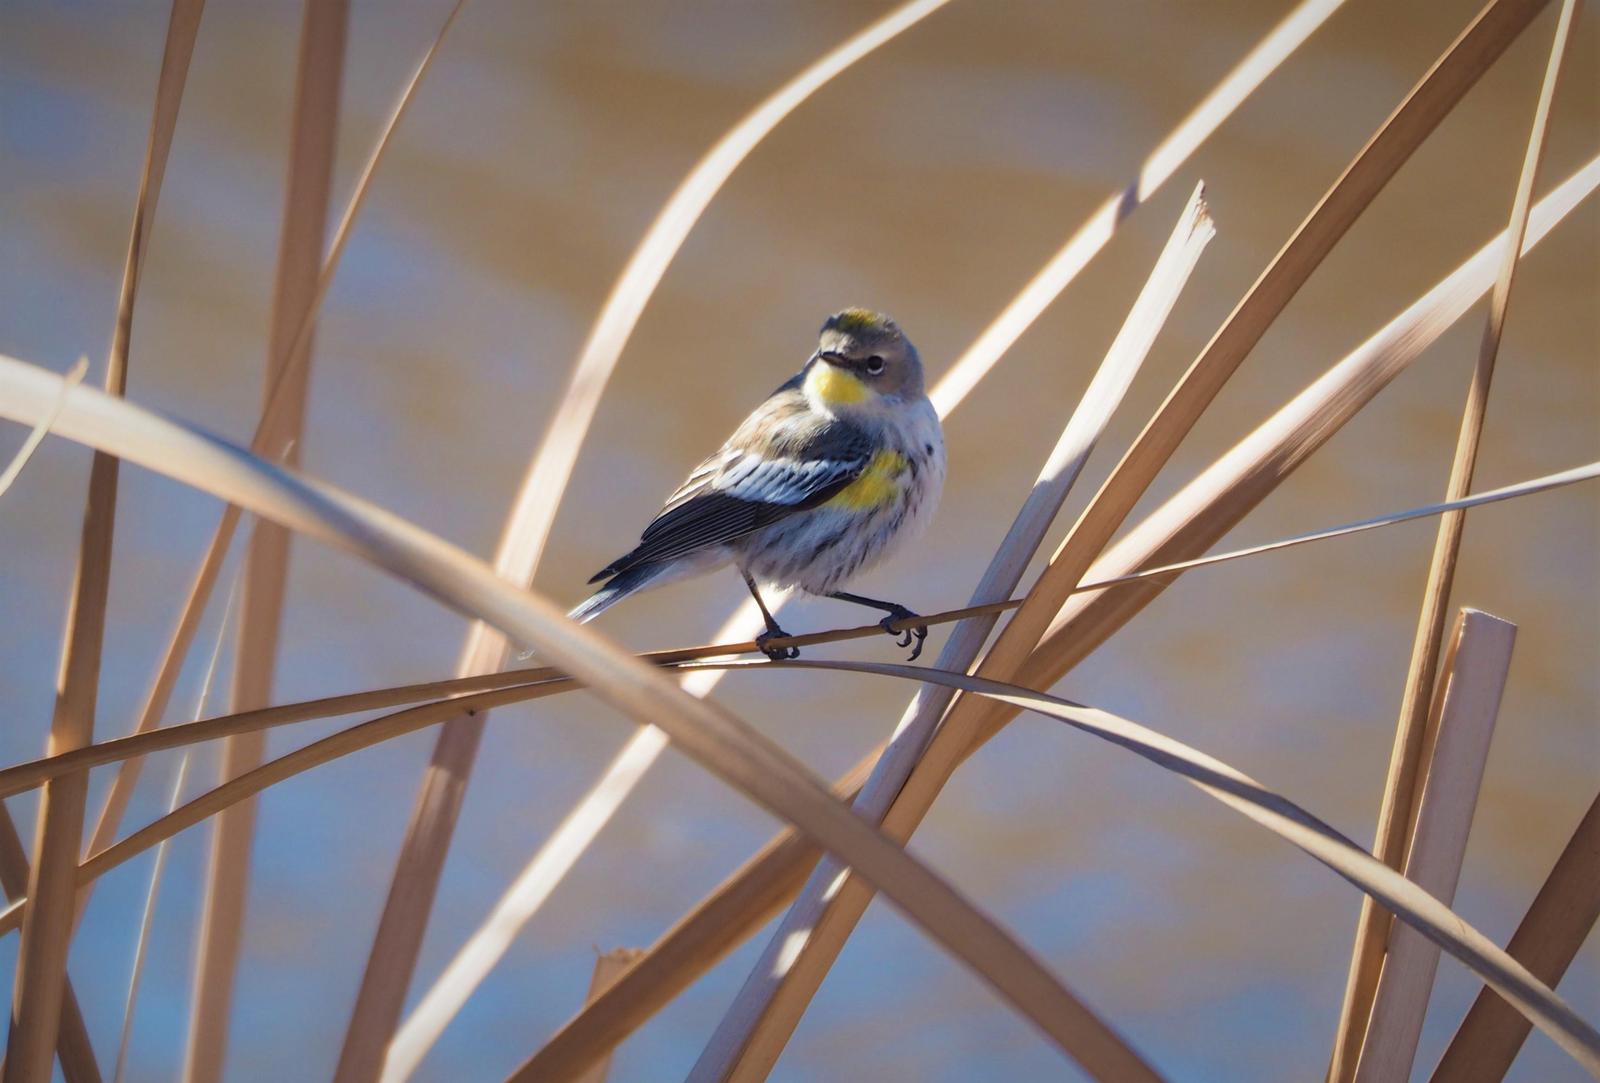 Yellow-rumped Warbler Photo by Colin Hill